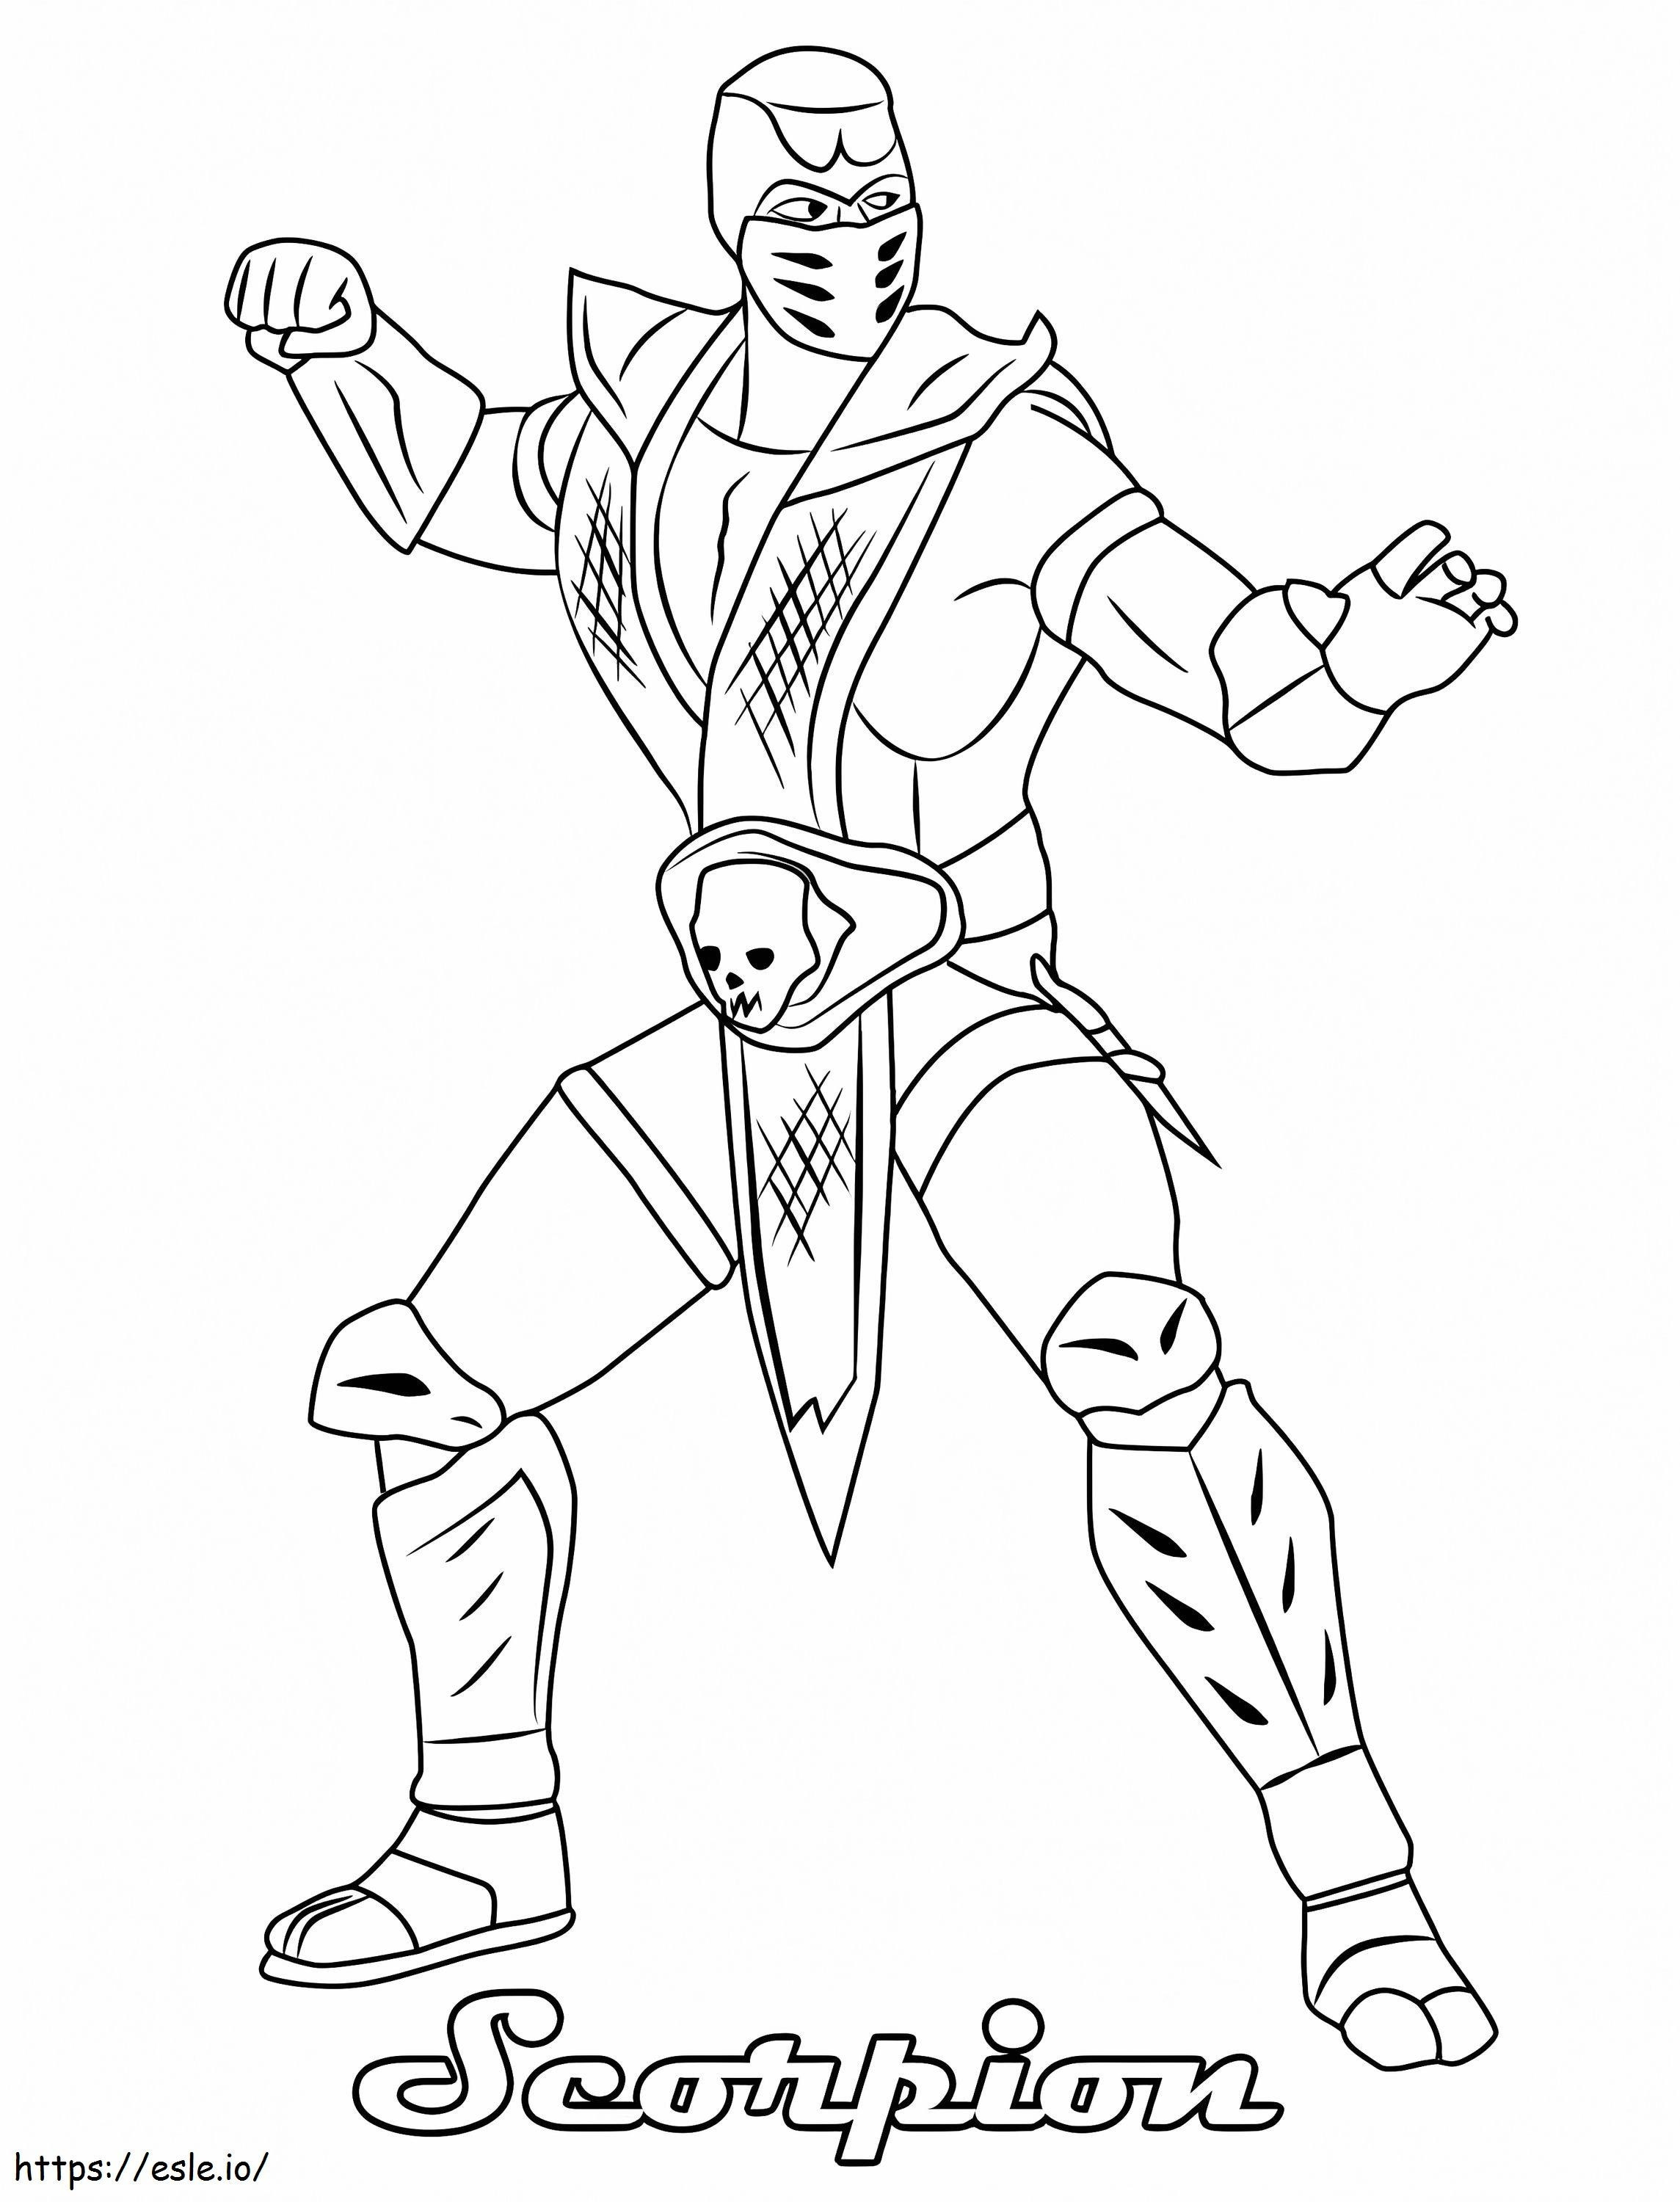 Scorpion From MK coloring page